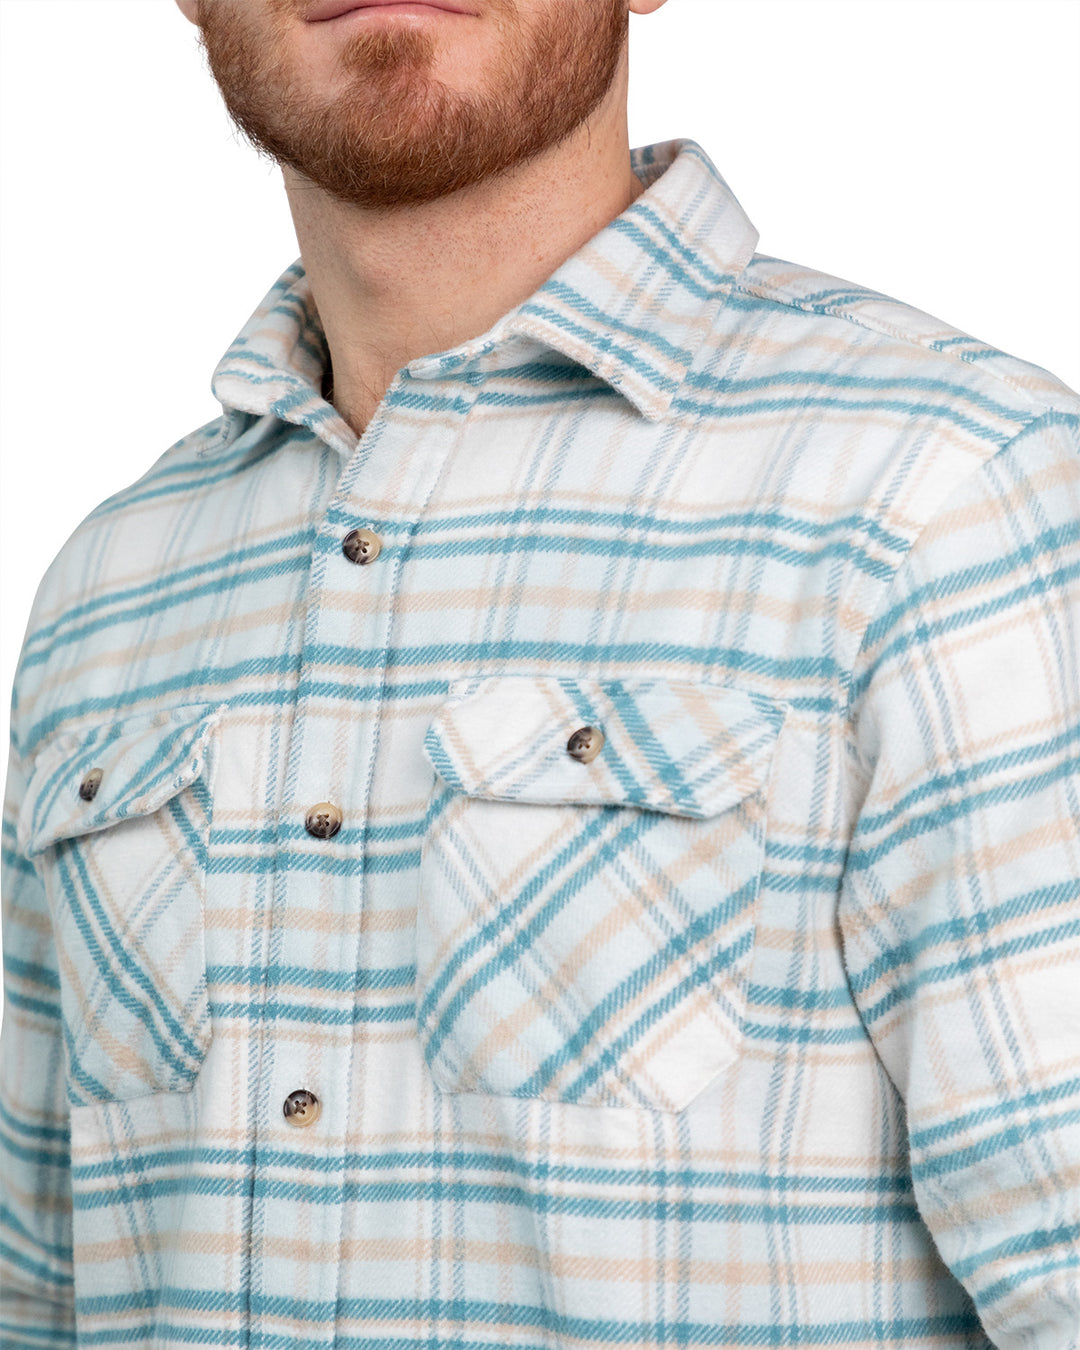 Grand Flannel Shirt for Men, 100% Cotton Heavyweight Flannel Shirt in Blue and Yellow Plaid